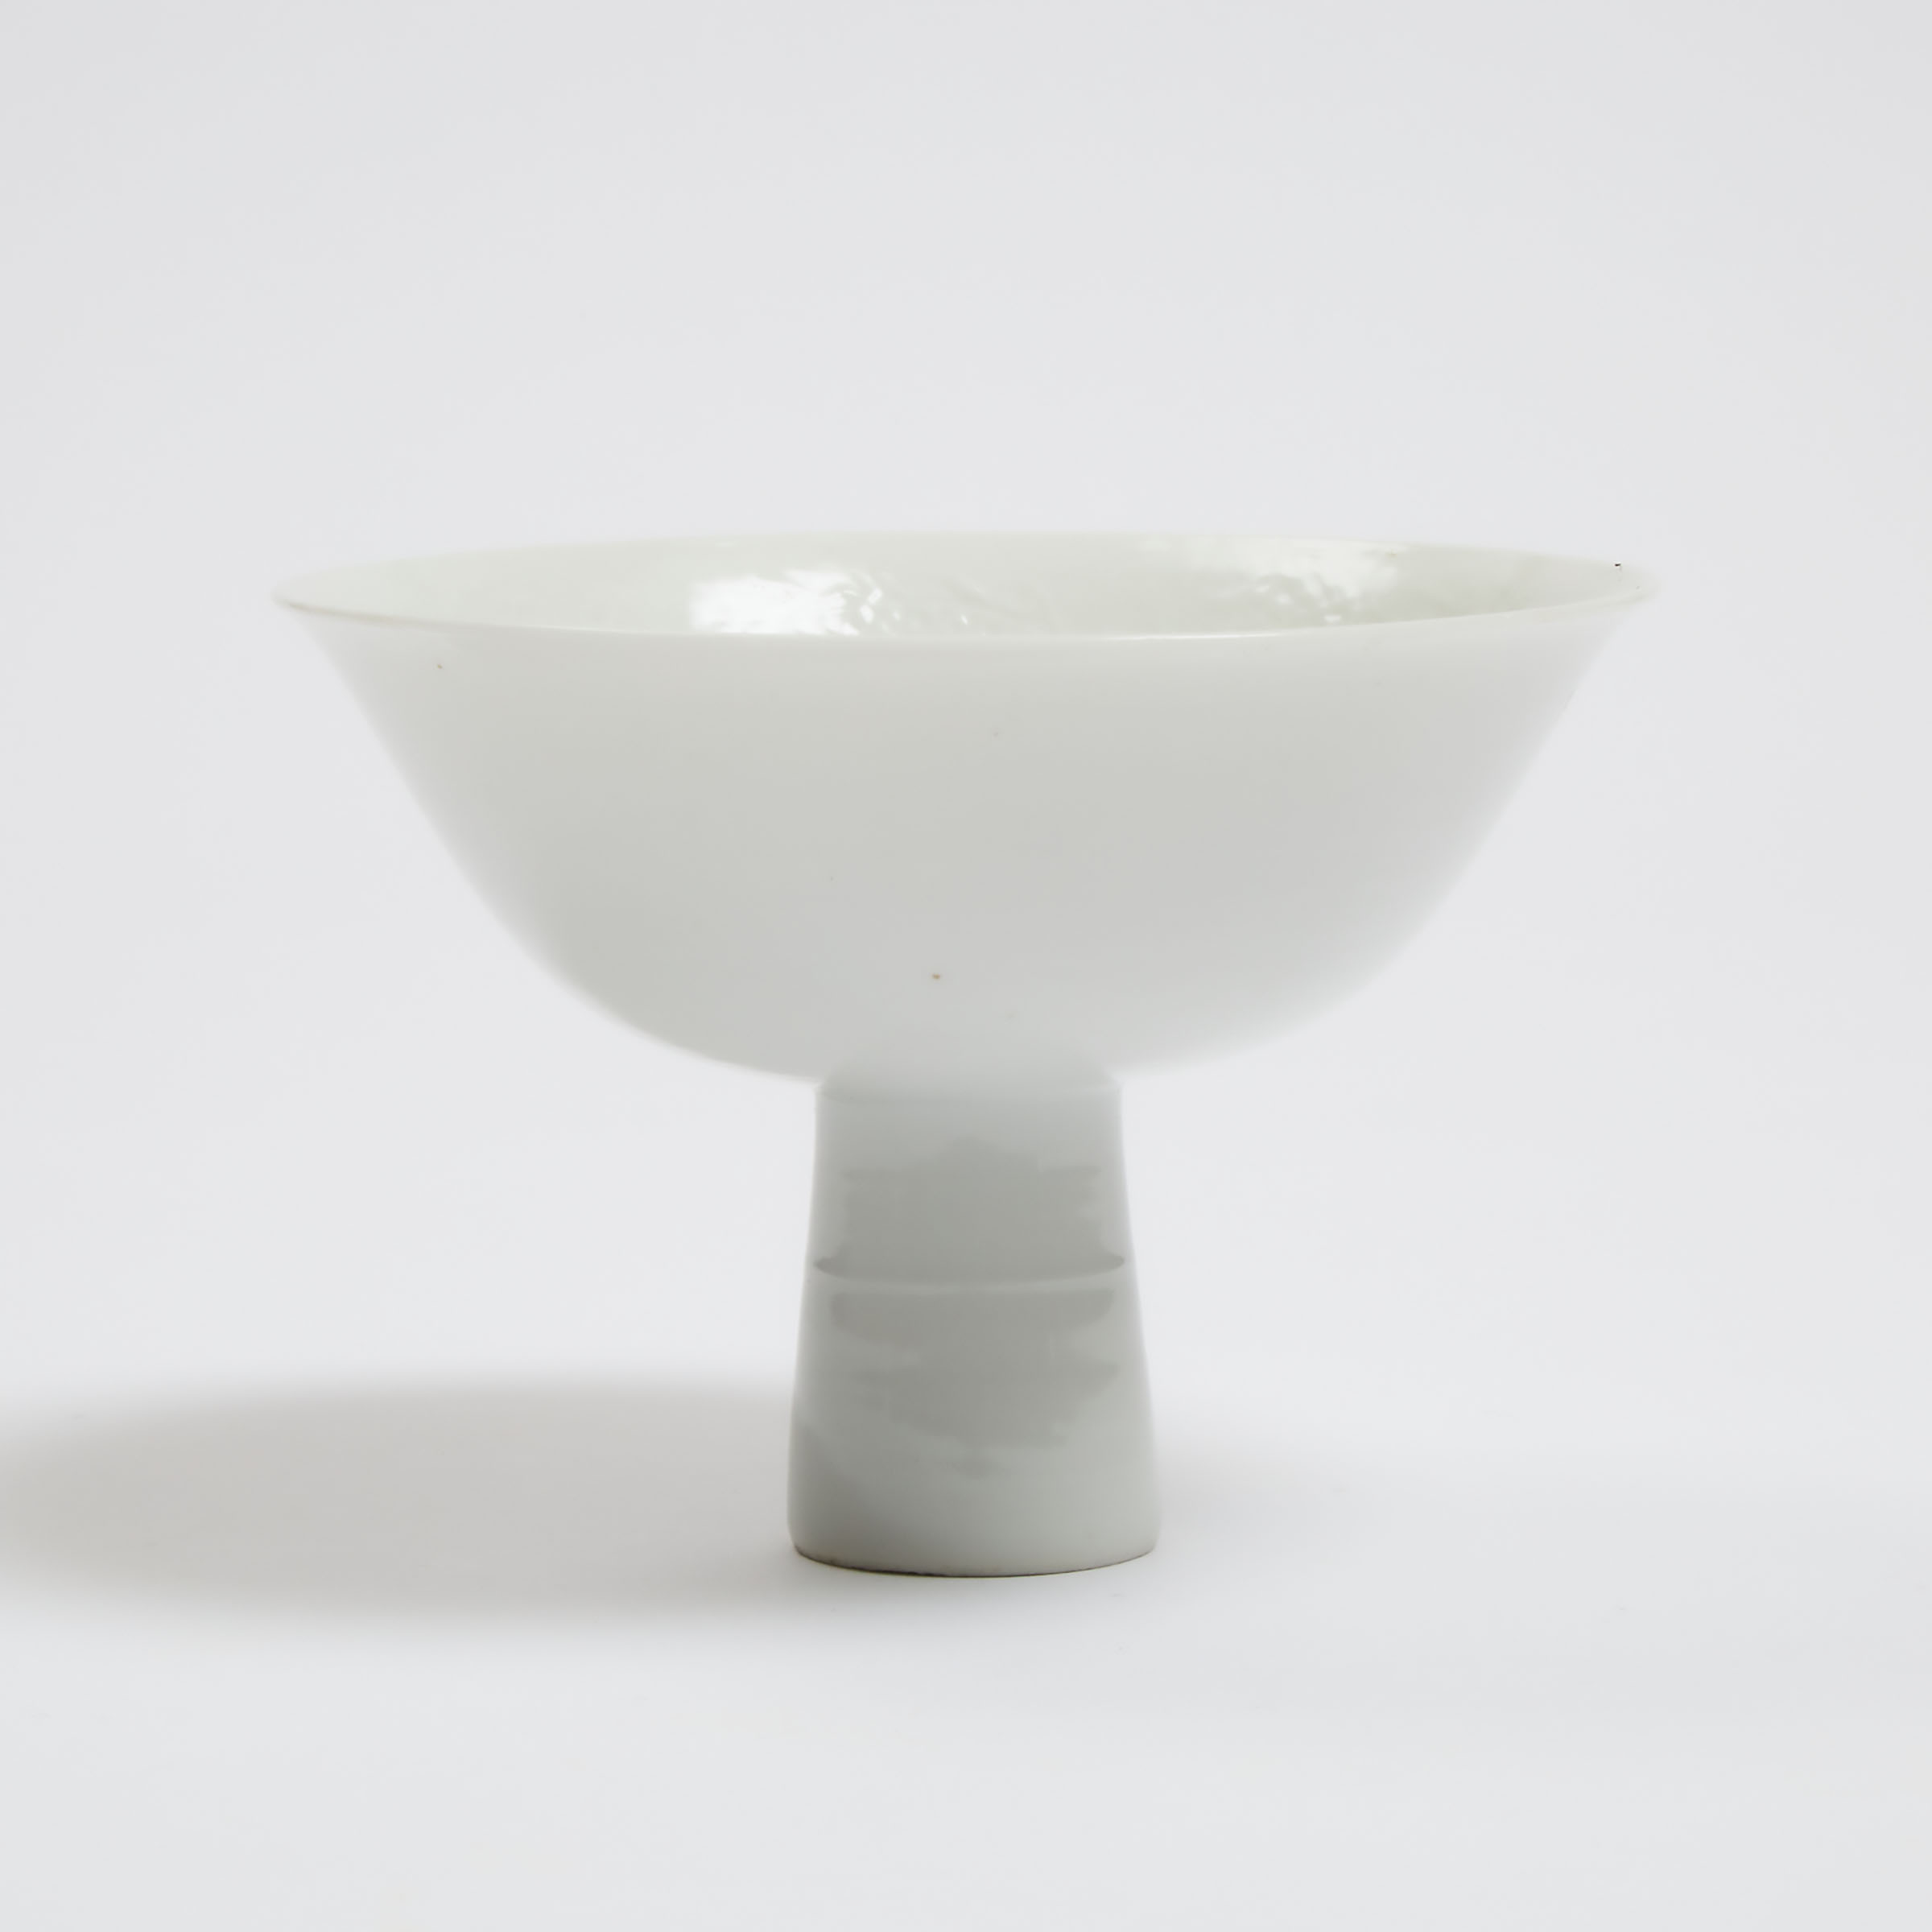 An Anhua-Decorated White-Glazed 'Dragon' Stem Bowl, Qing Dynasty, 18th Century